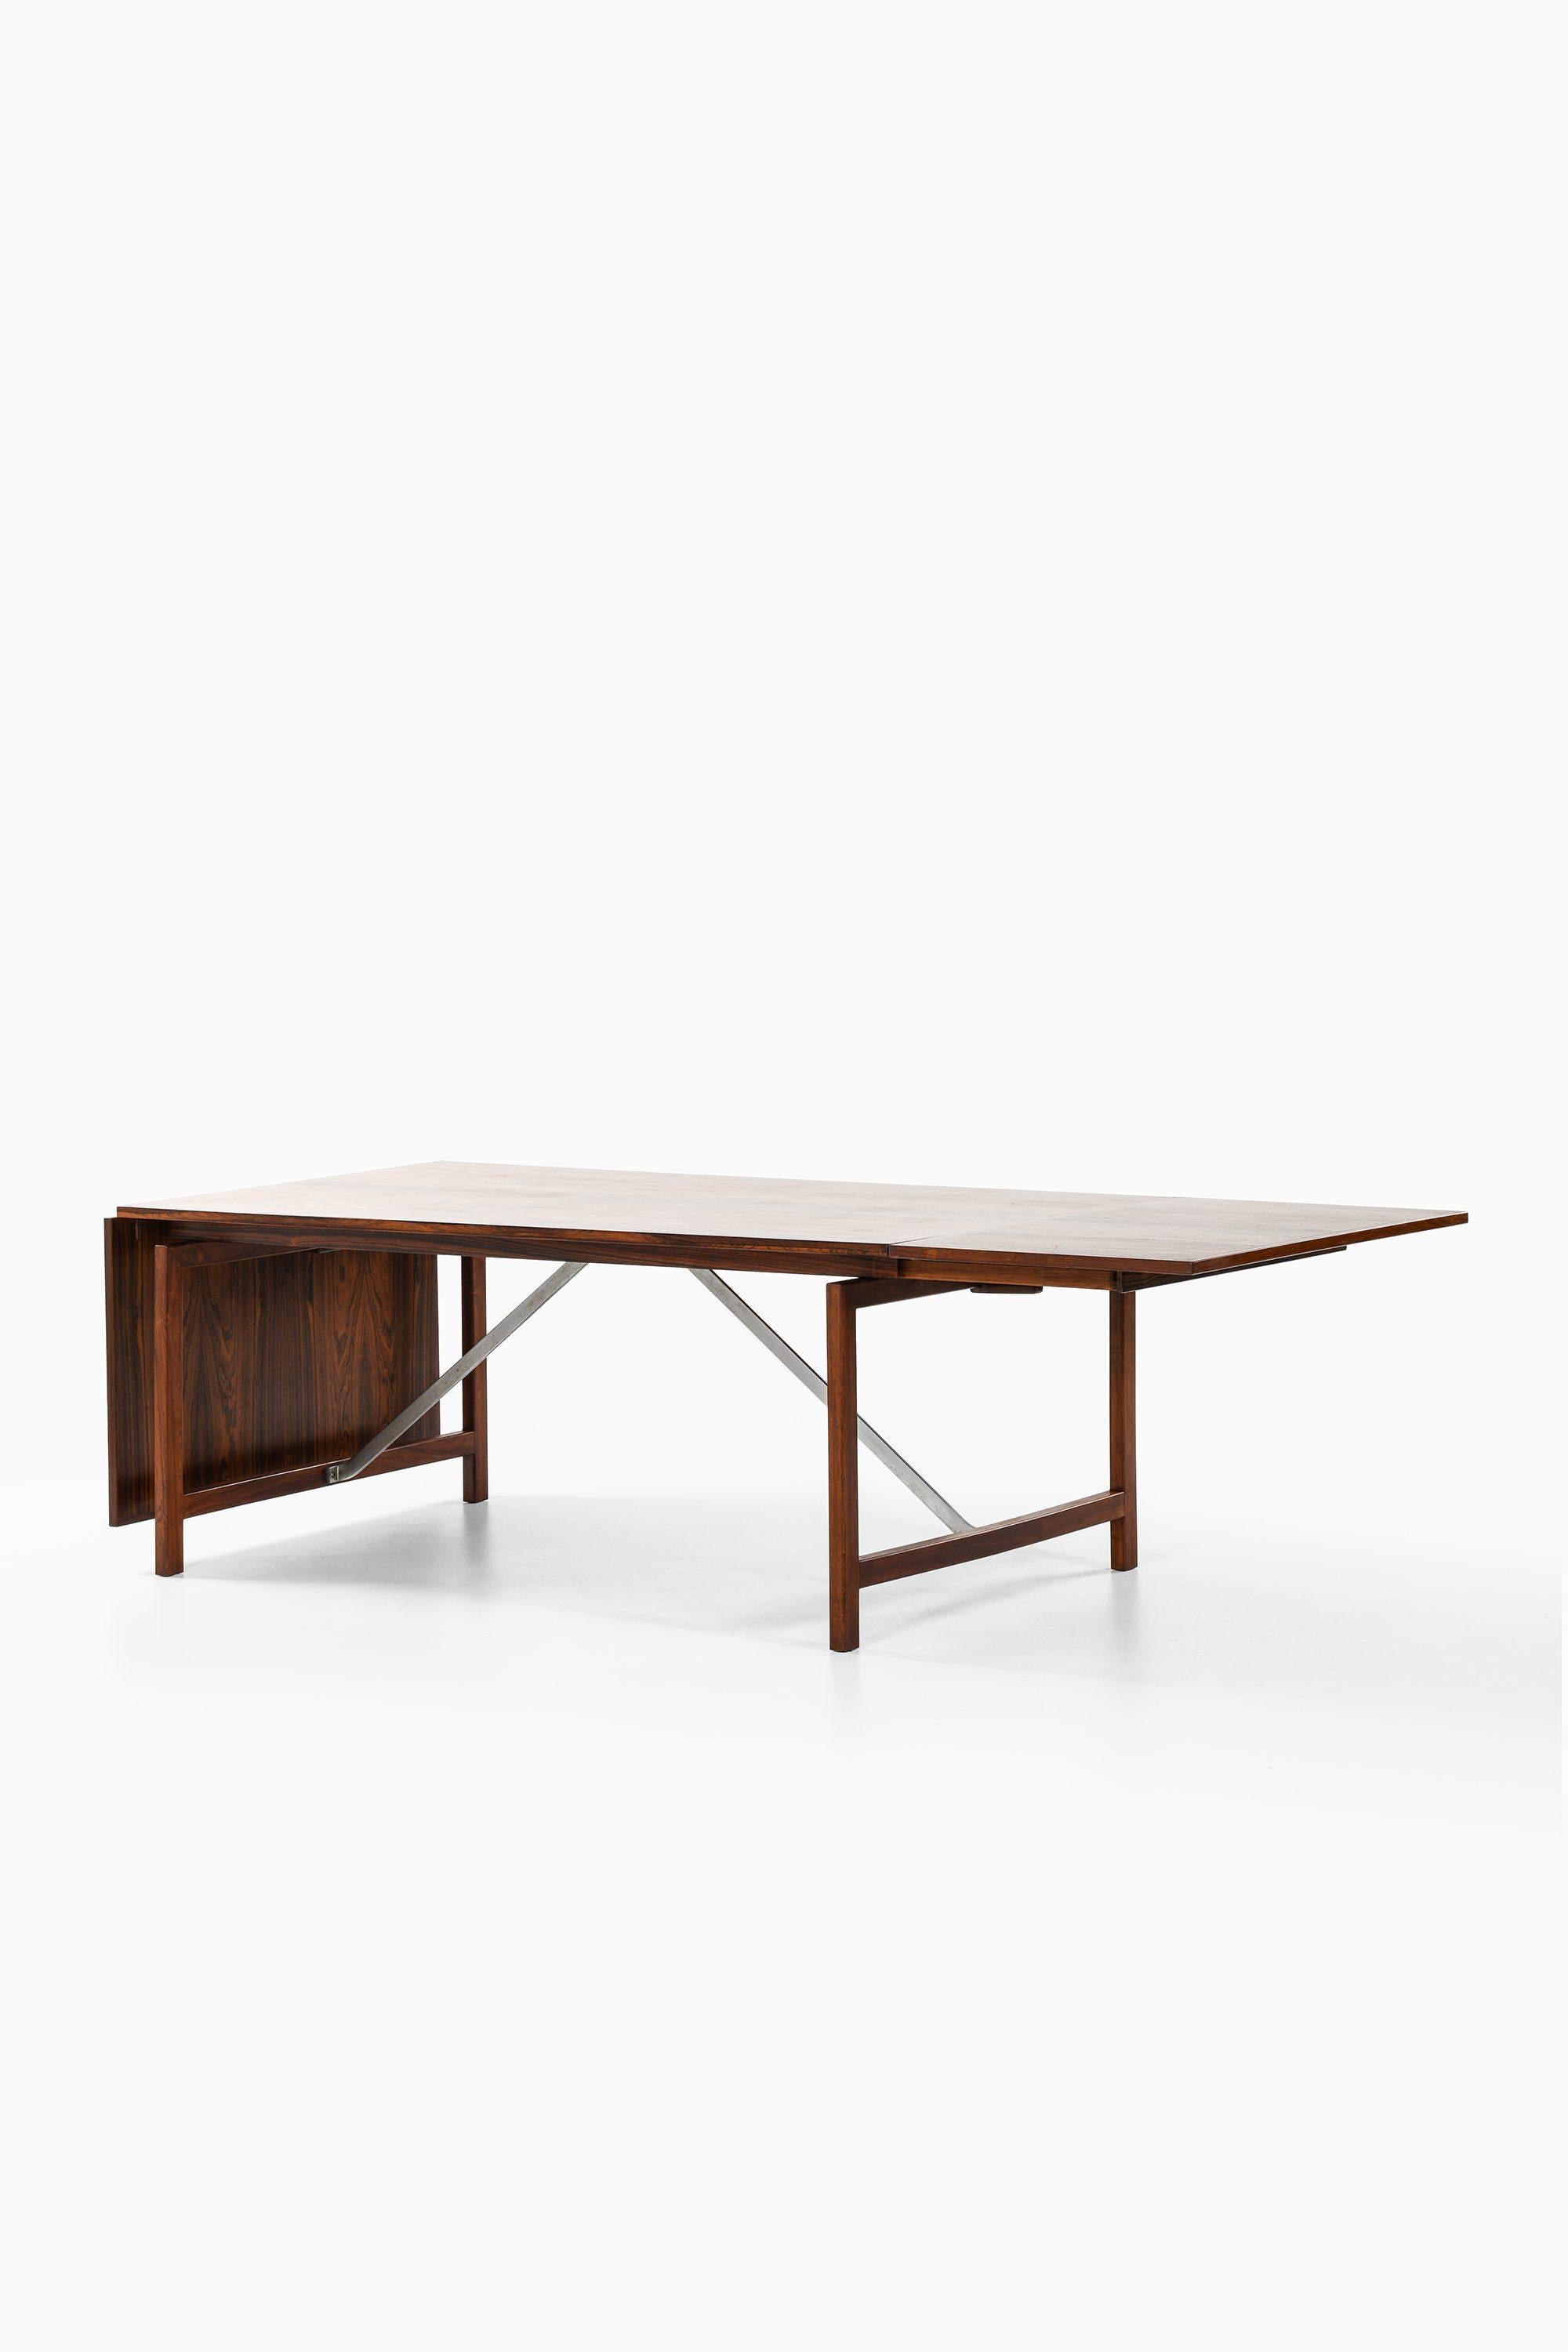 Dining Table in Rosewood and Steel by Hans Wegner, 1960s

Additional Information:
Material: Rosewood and steel
Style: midcentury, Scandinavian
Produced by cabinetmaker Johannes Hansen in Denmark
Dimensions (W x D x H): 183 [300] x 100 x 71